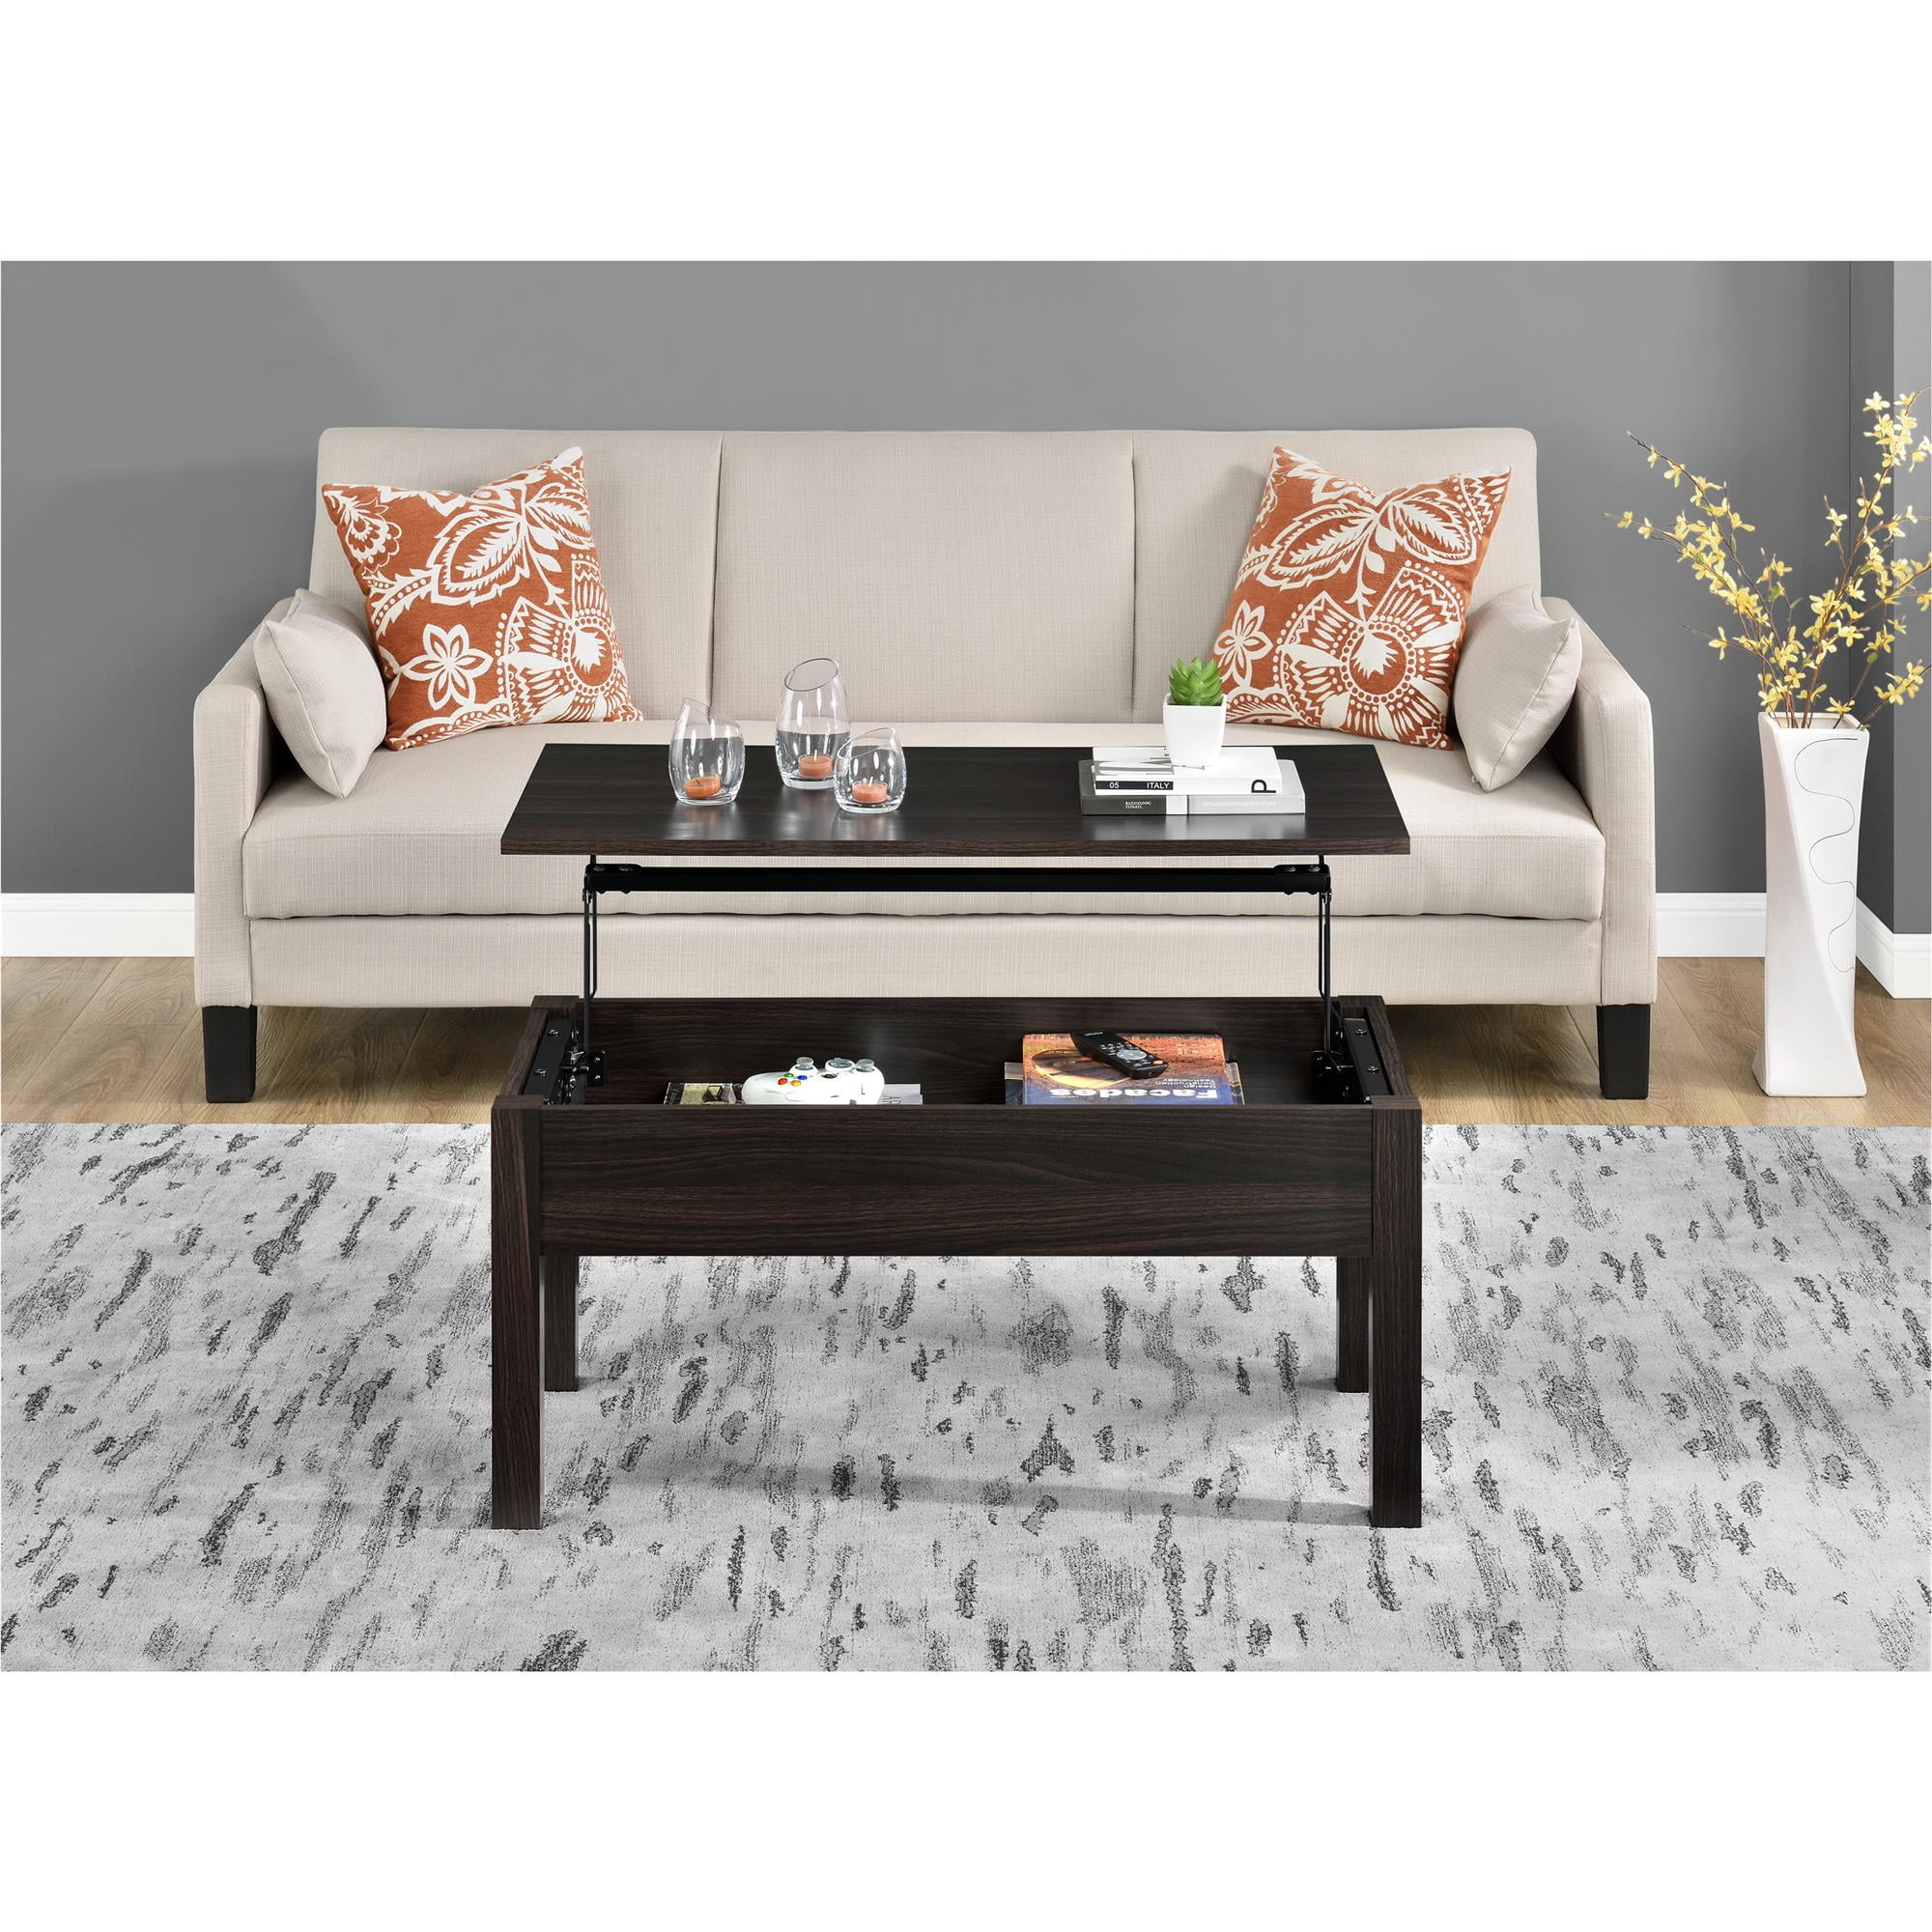 lift top coffee table at walmart